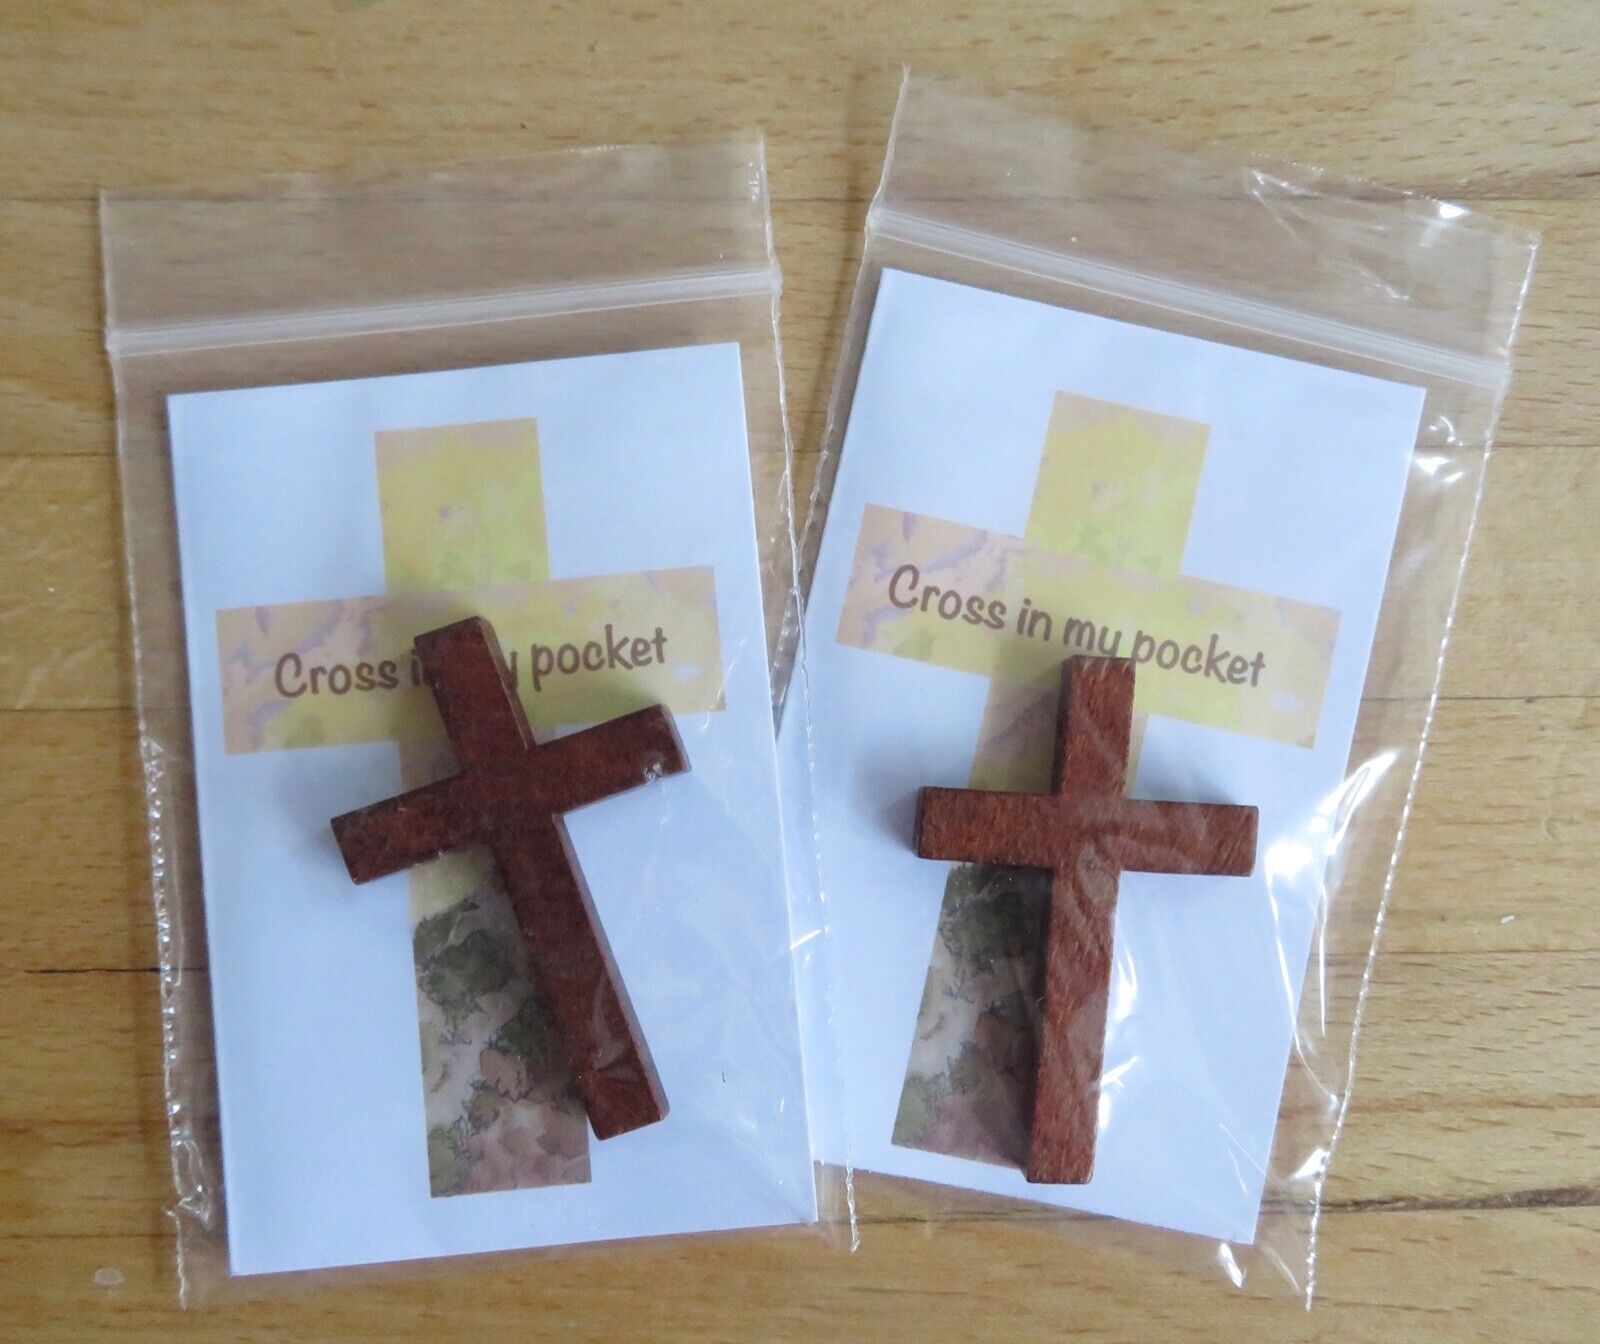 Cross in your pocket x2 Wooden Approx 43mm each Small Card with uplifting verse